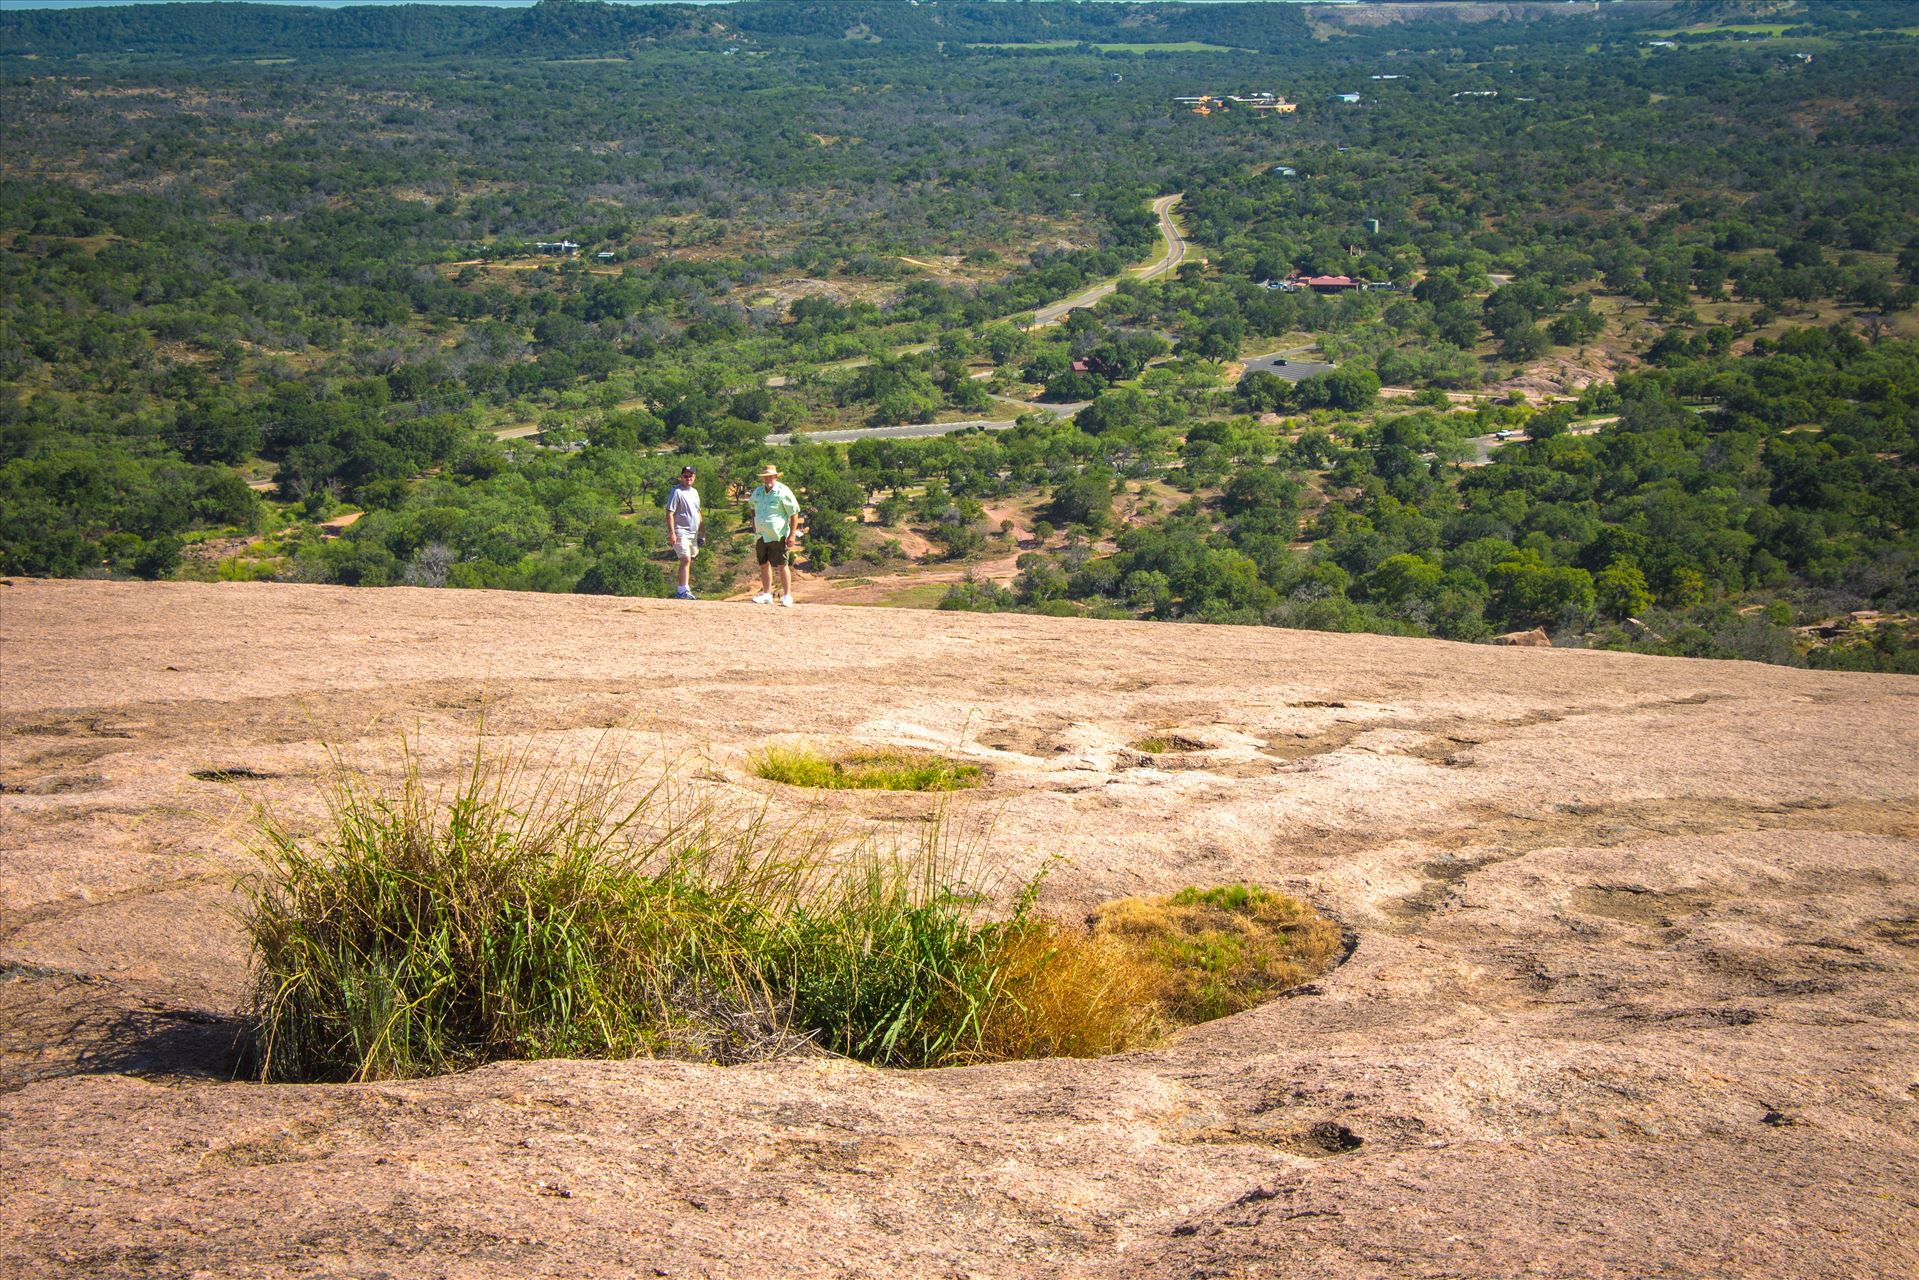 20130723-Enchanted Rock-DSLR-041.jpg  by Charles Smith Photography